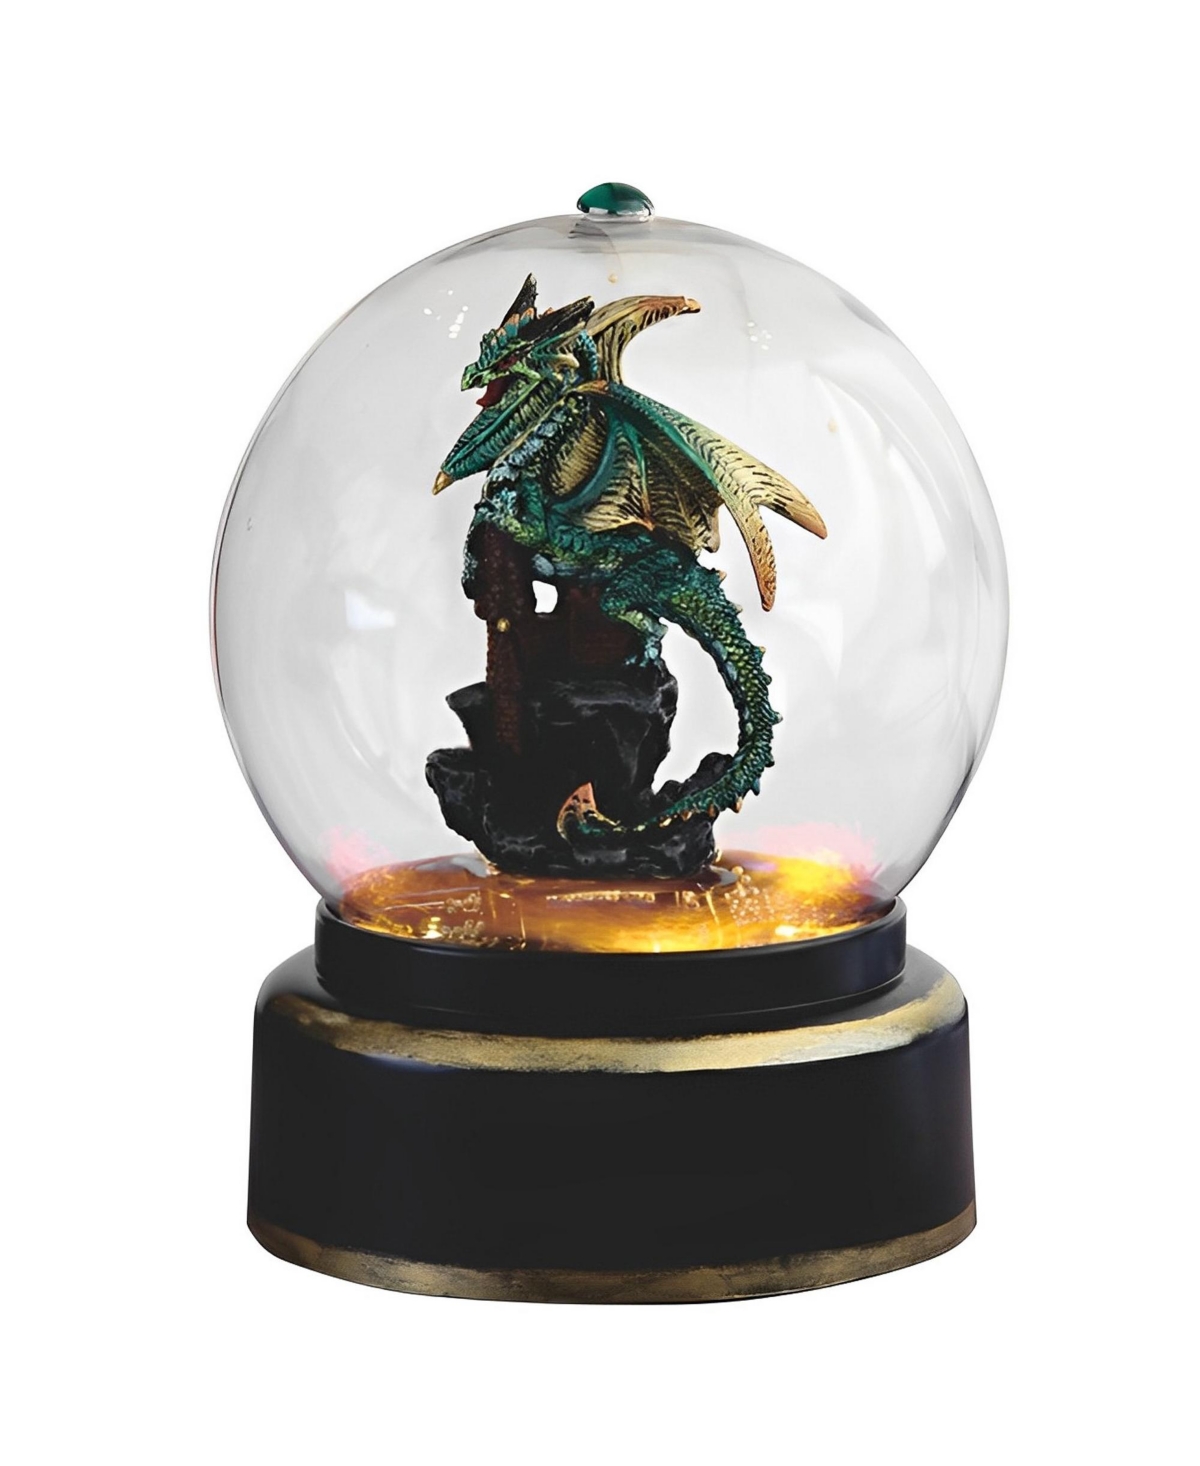 7.5"H Green Dragon in Air Powered Snow Globe Home Decor Perfect Gift for House Warming, Holidays and Birthdays - Multicolor